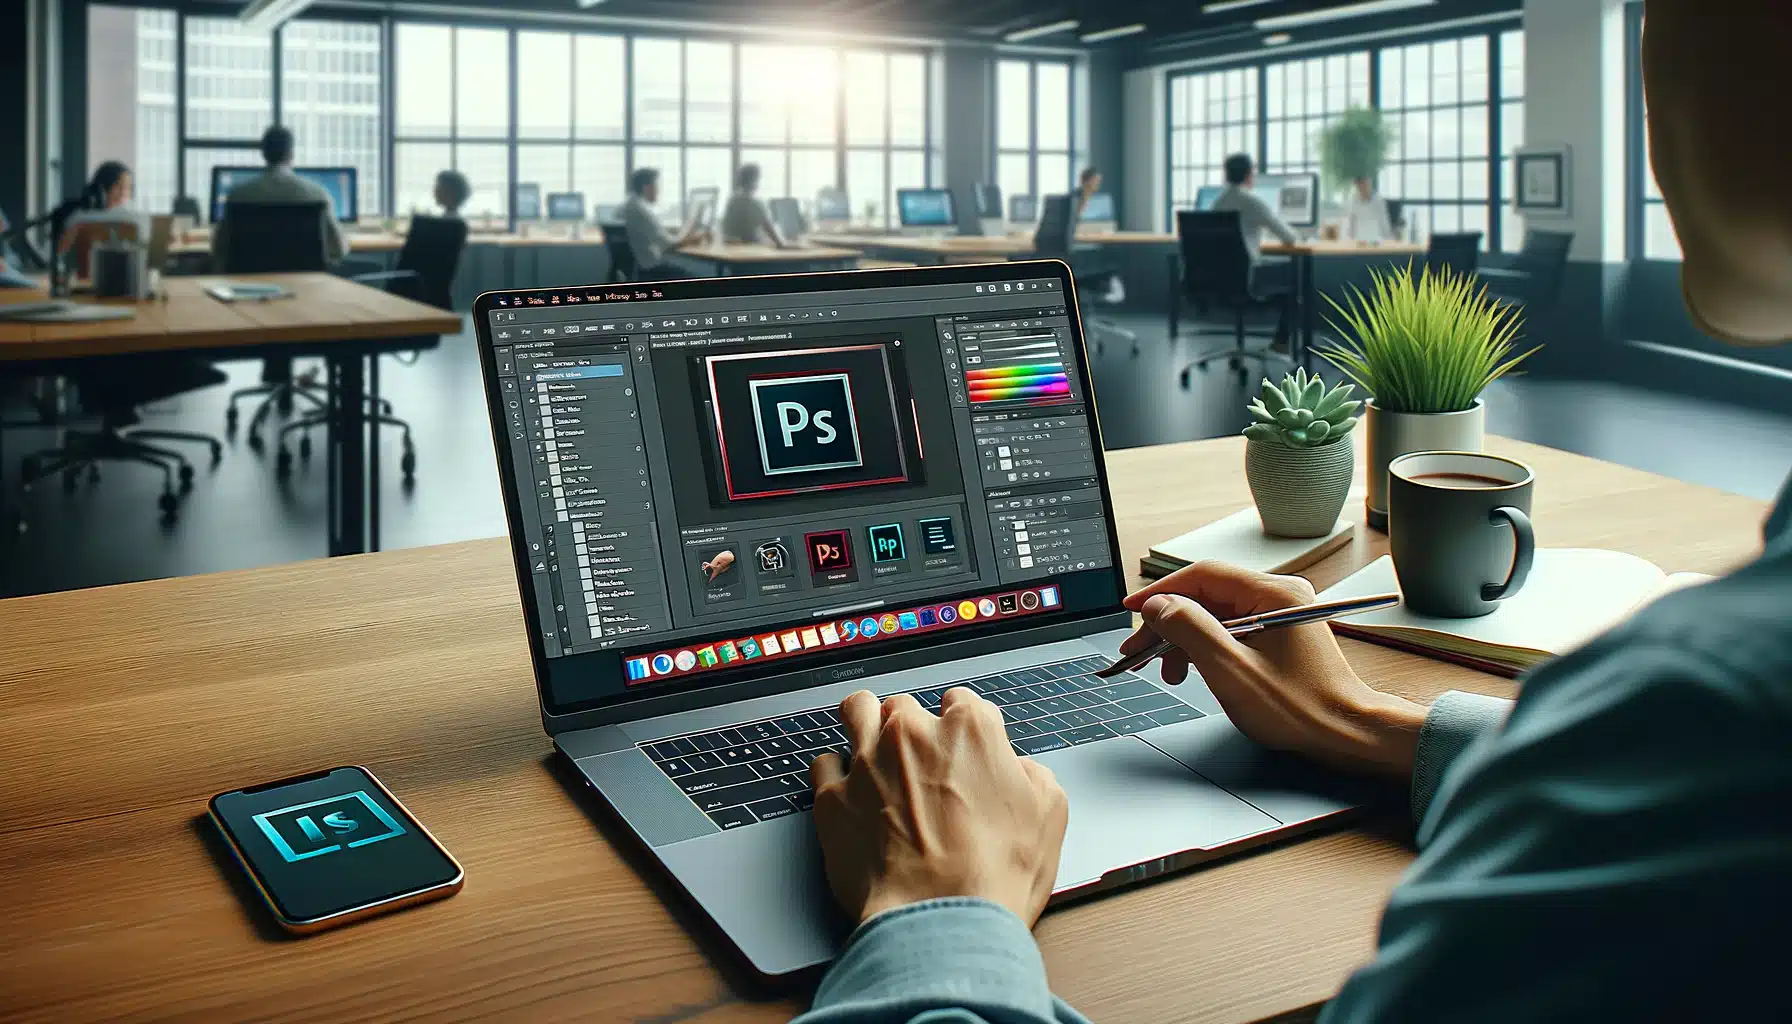 A creative professional analyzing new features in Adobe Photoshop on a laptop in a modern office environment.